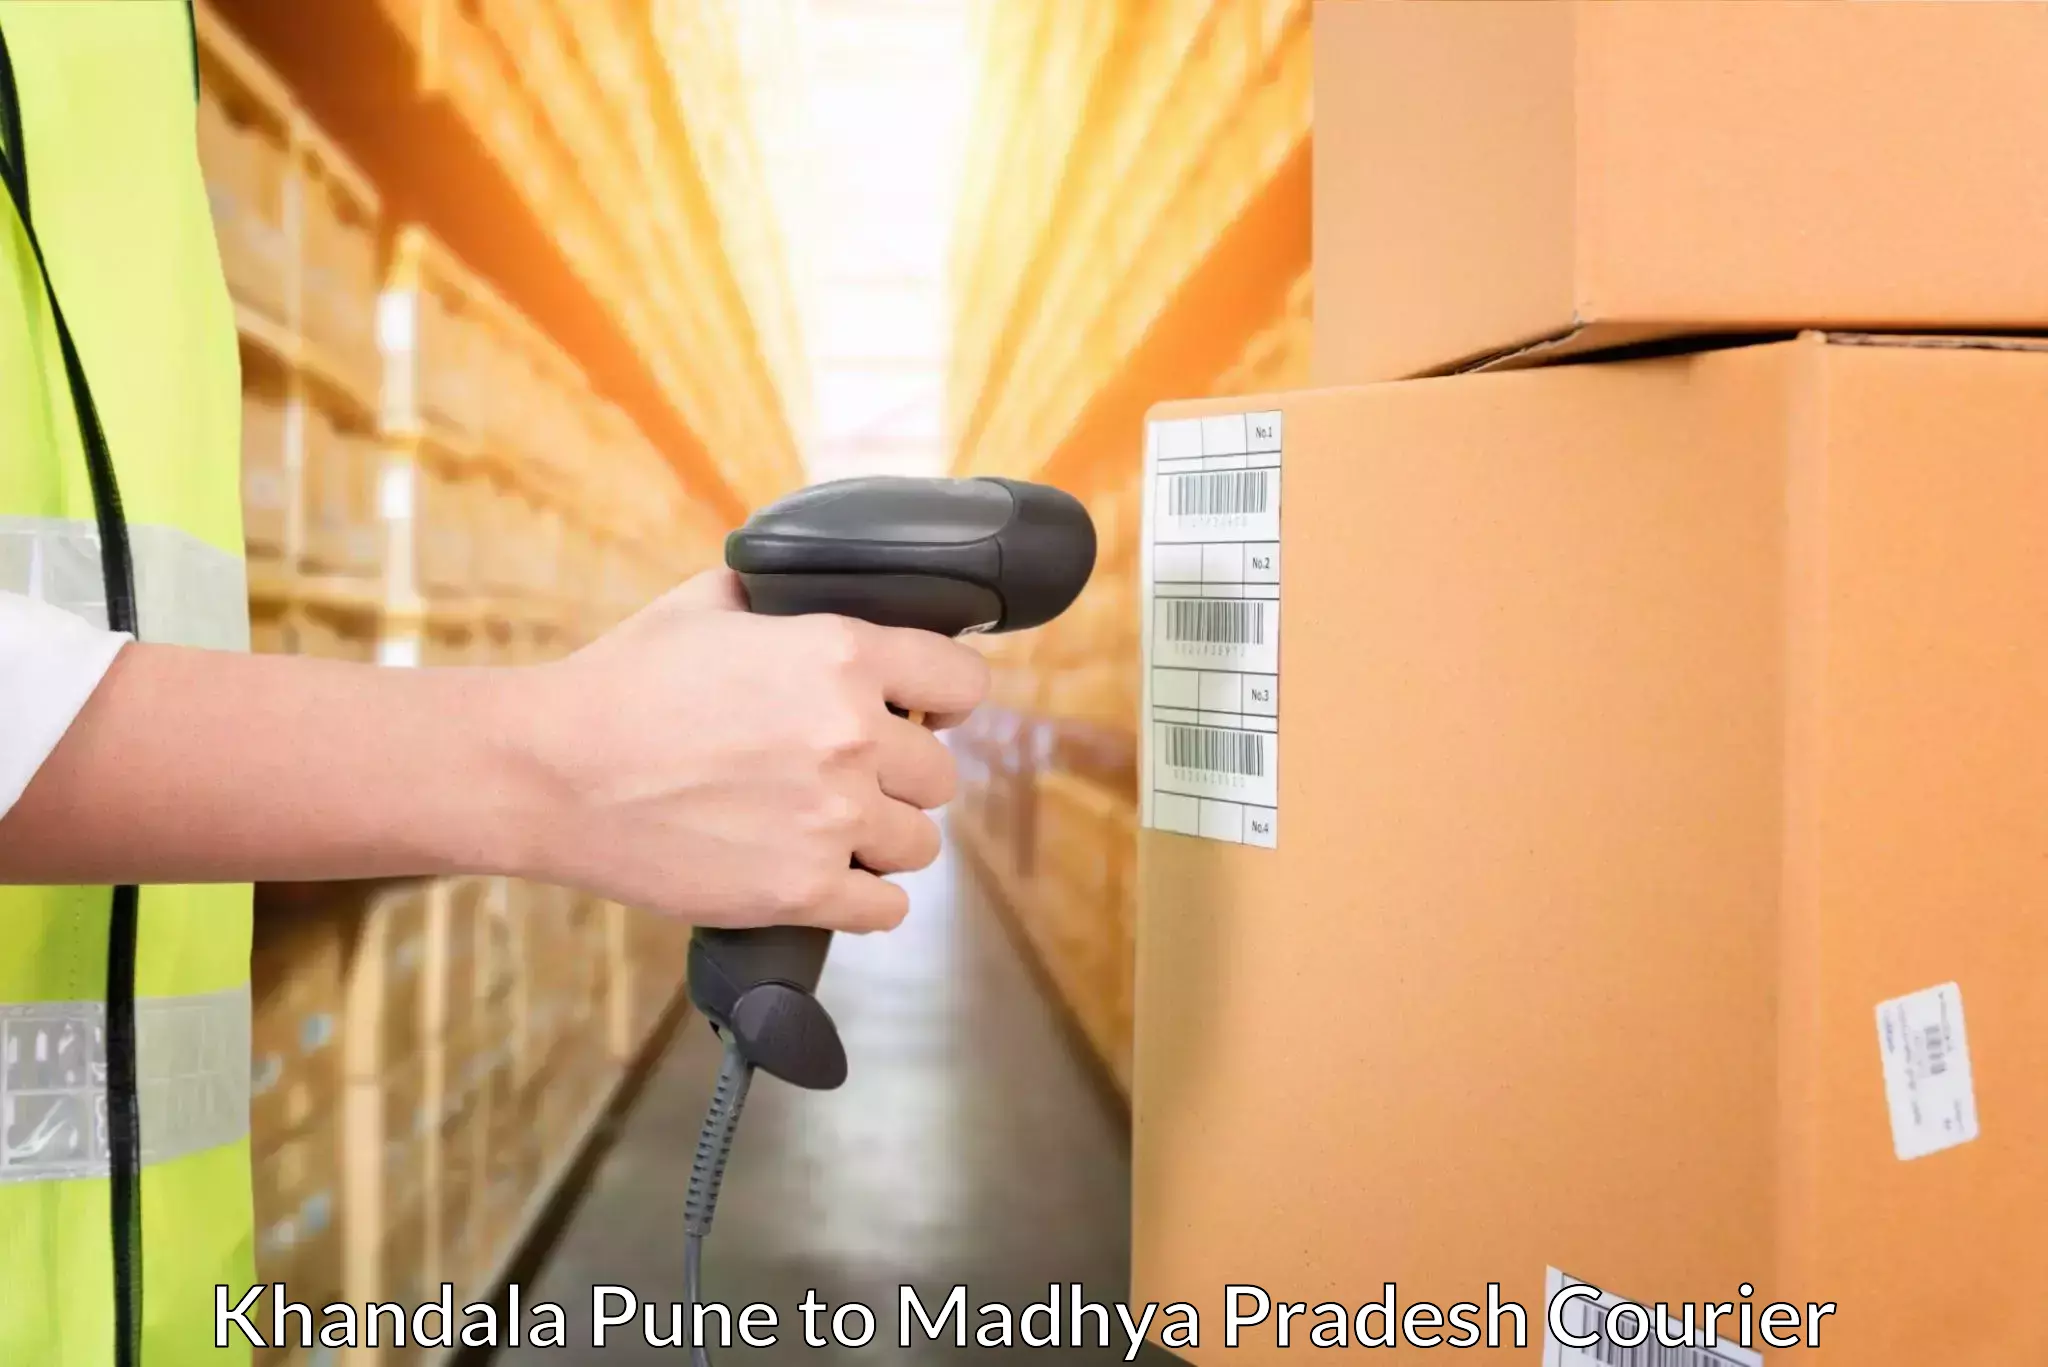 Courier tracking online Khandala Pune to Sausar